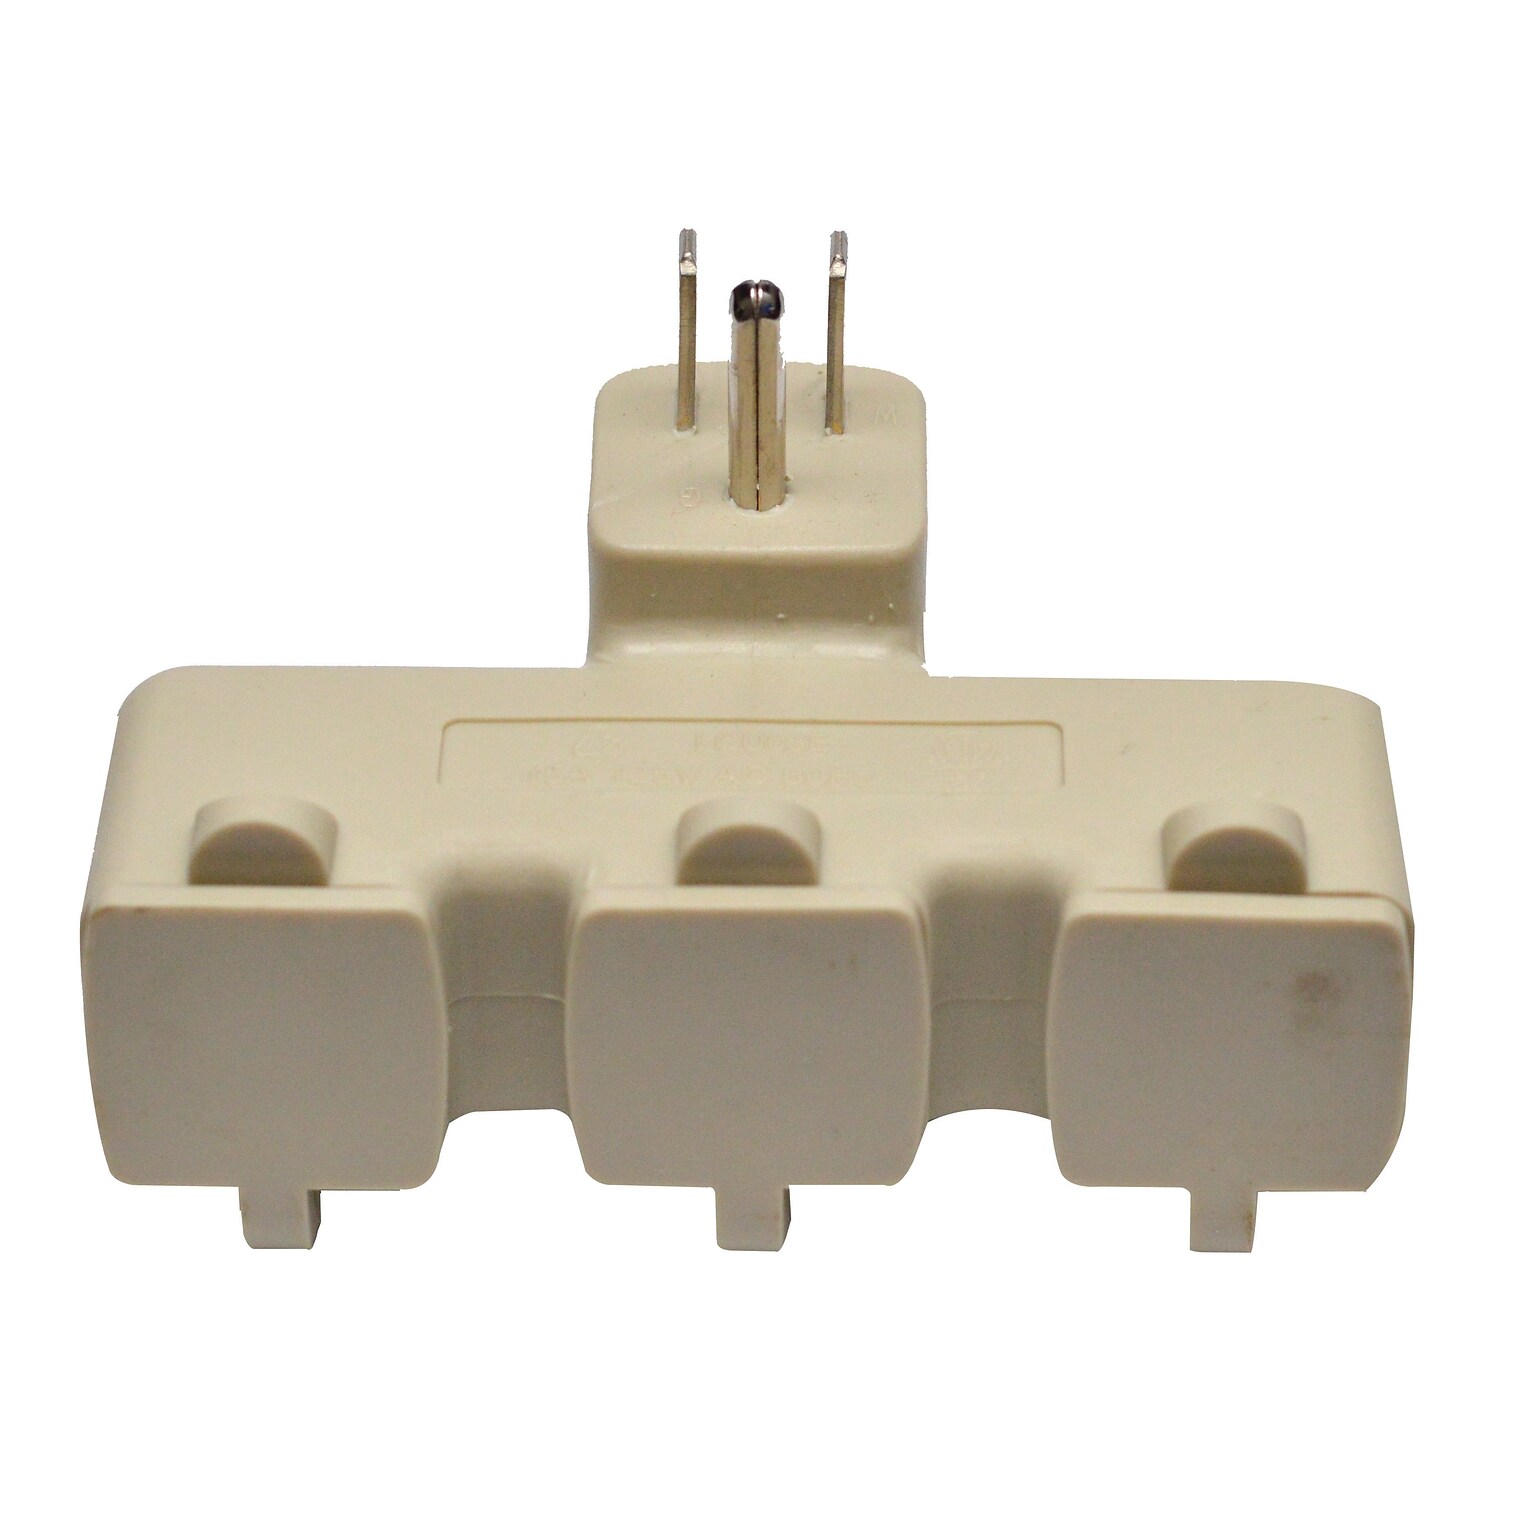 GoGreen Power 3 Outlet Tri Tap Adapter with Covers, Beige (GG-03431BE)